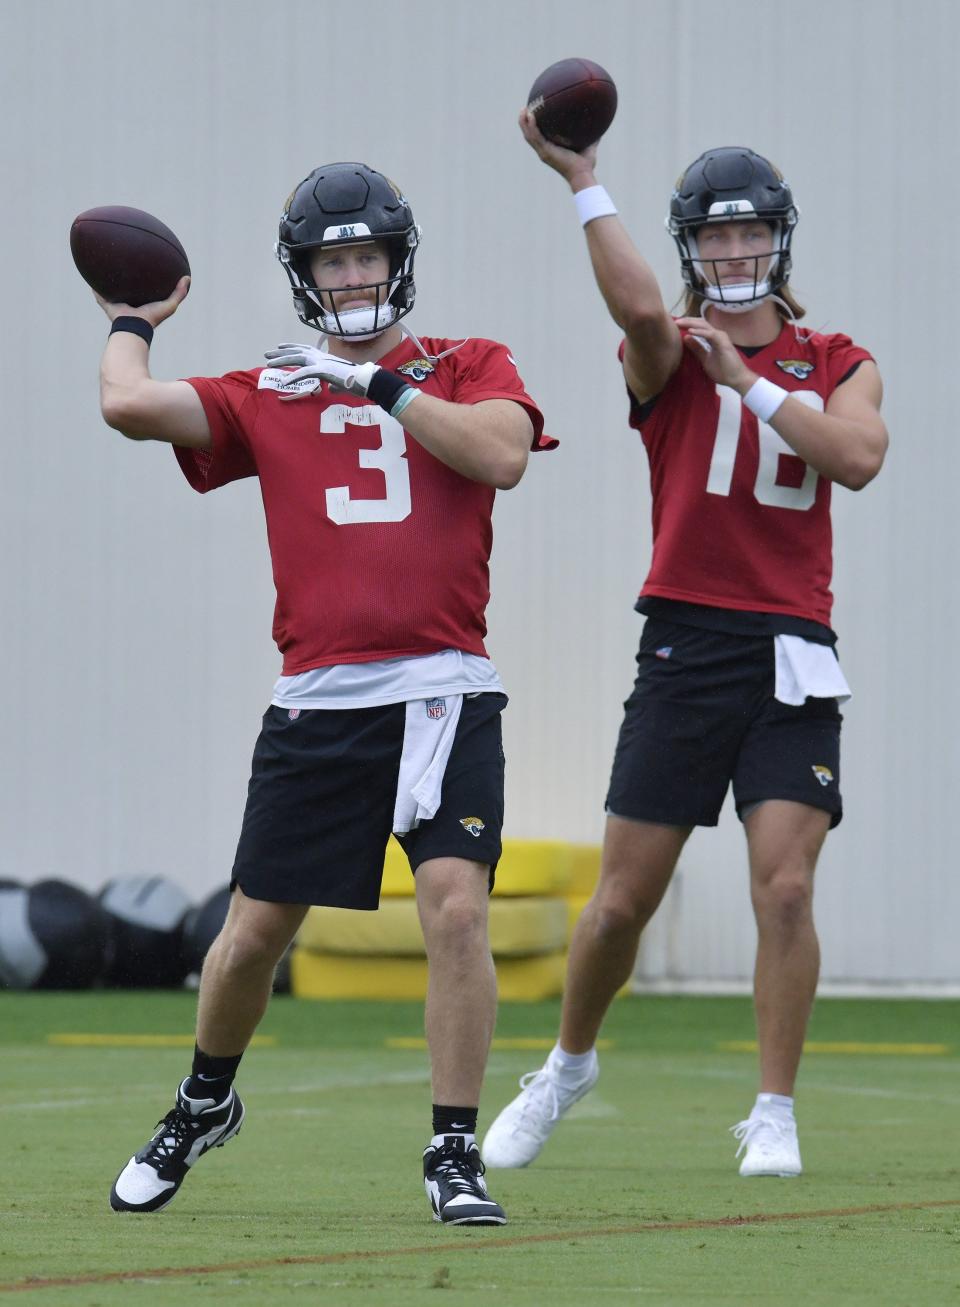 Jacksonville Jaguars quarterbacks C.J. Beathard (3) and Trevor Lawrence (16) work on passing techniques during Friday's training camp session at the Miller Electric Center.